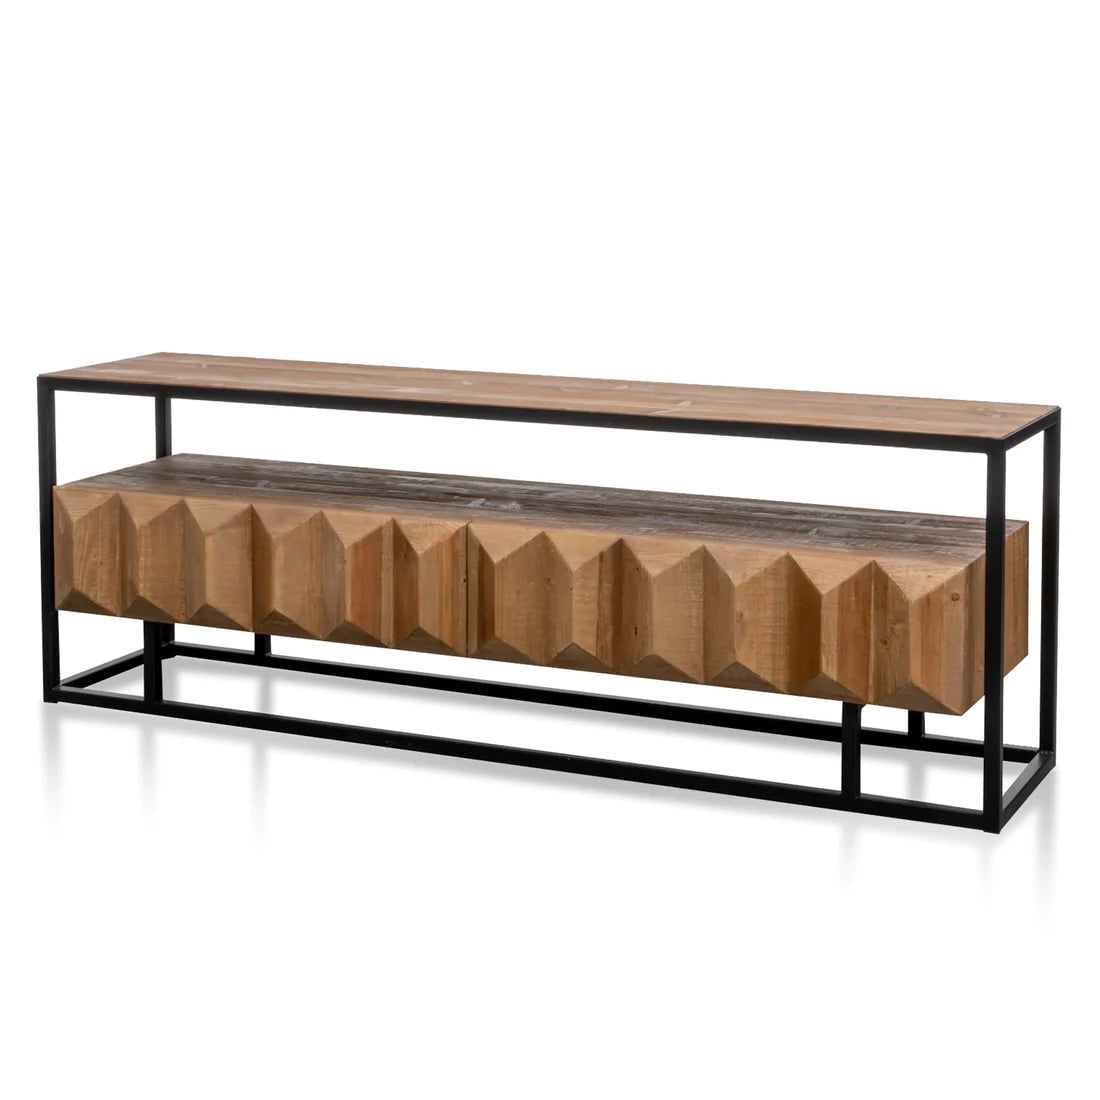 Entertainment TV Unit - Natural with Black Frame